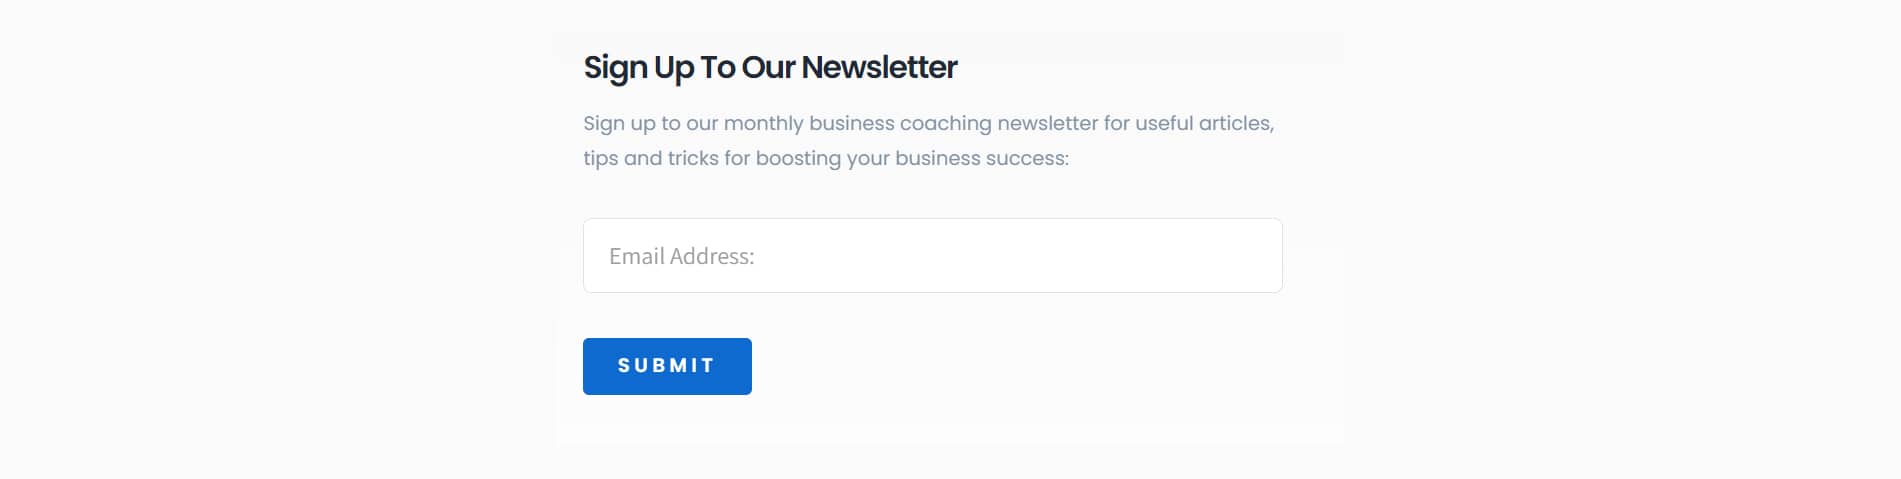 Avada Business Coach Footer Subscription Form